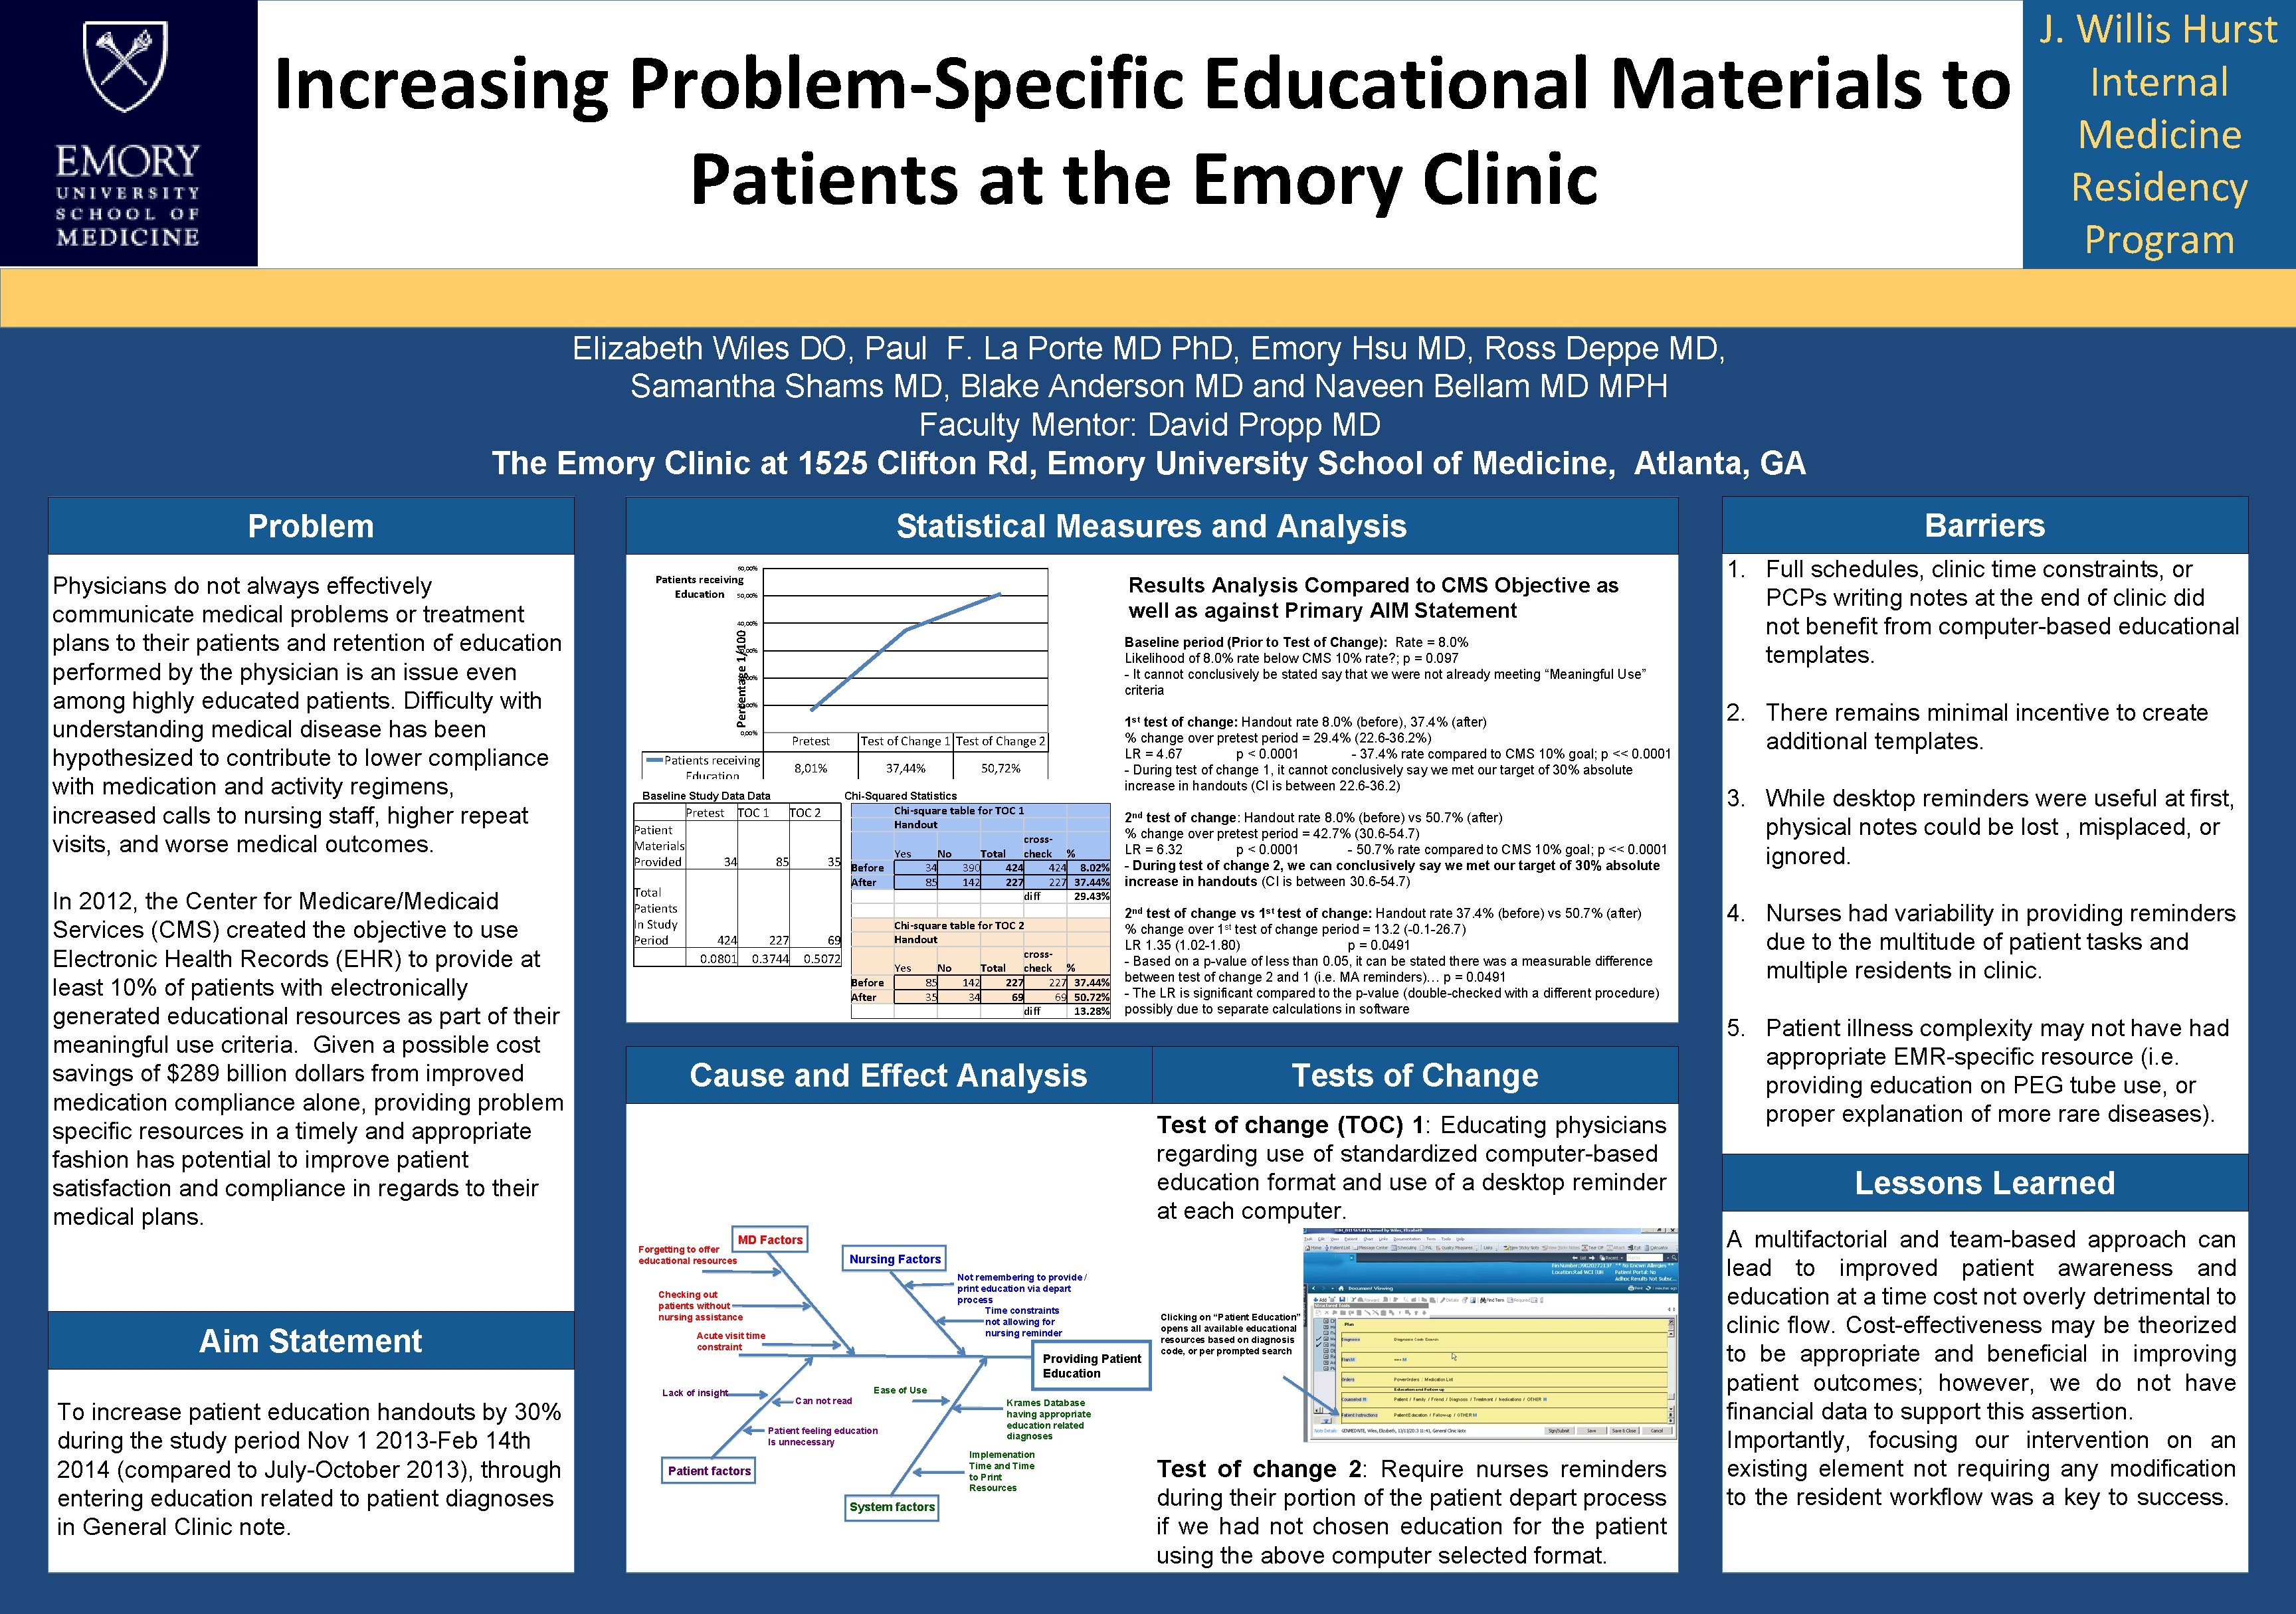 Increasing Problem-Specific Educational Materials to Patients at the Emory Clinic J. Willis Hurst Internal